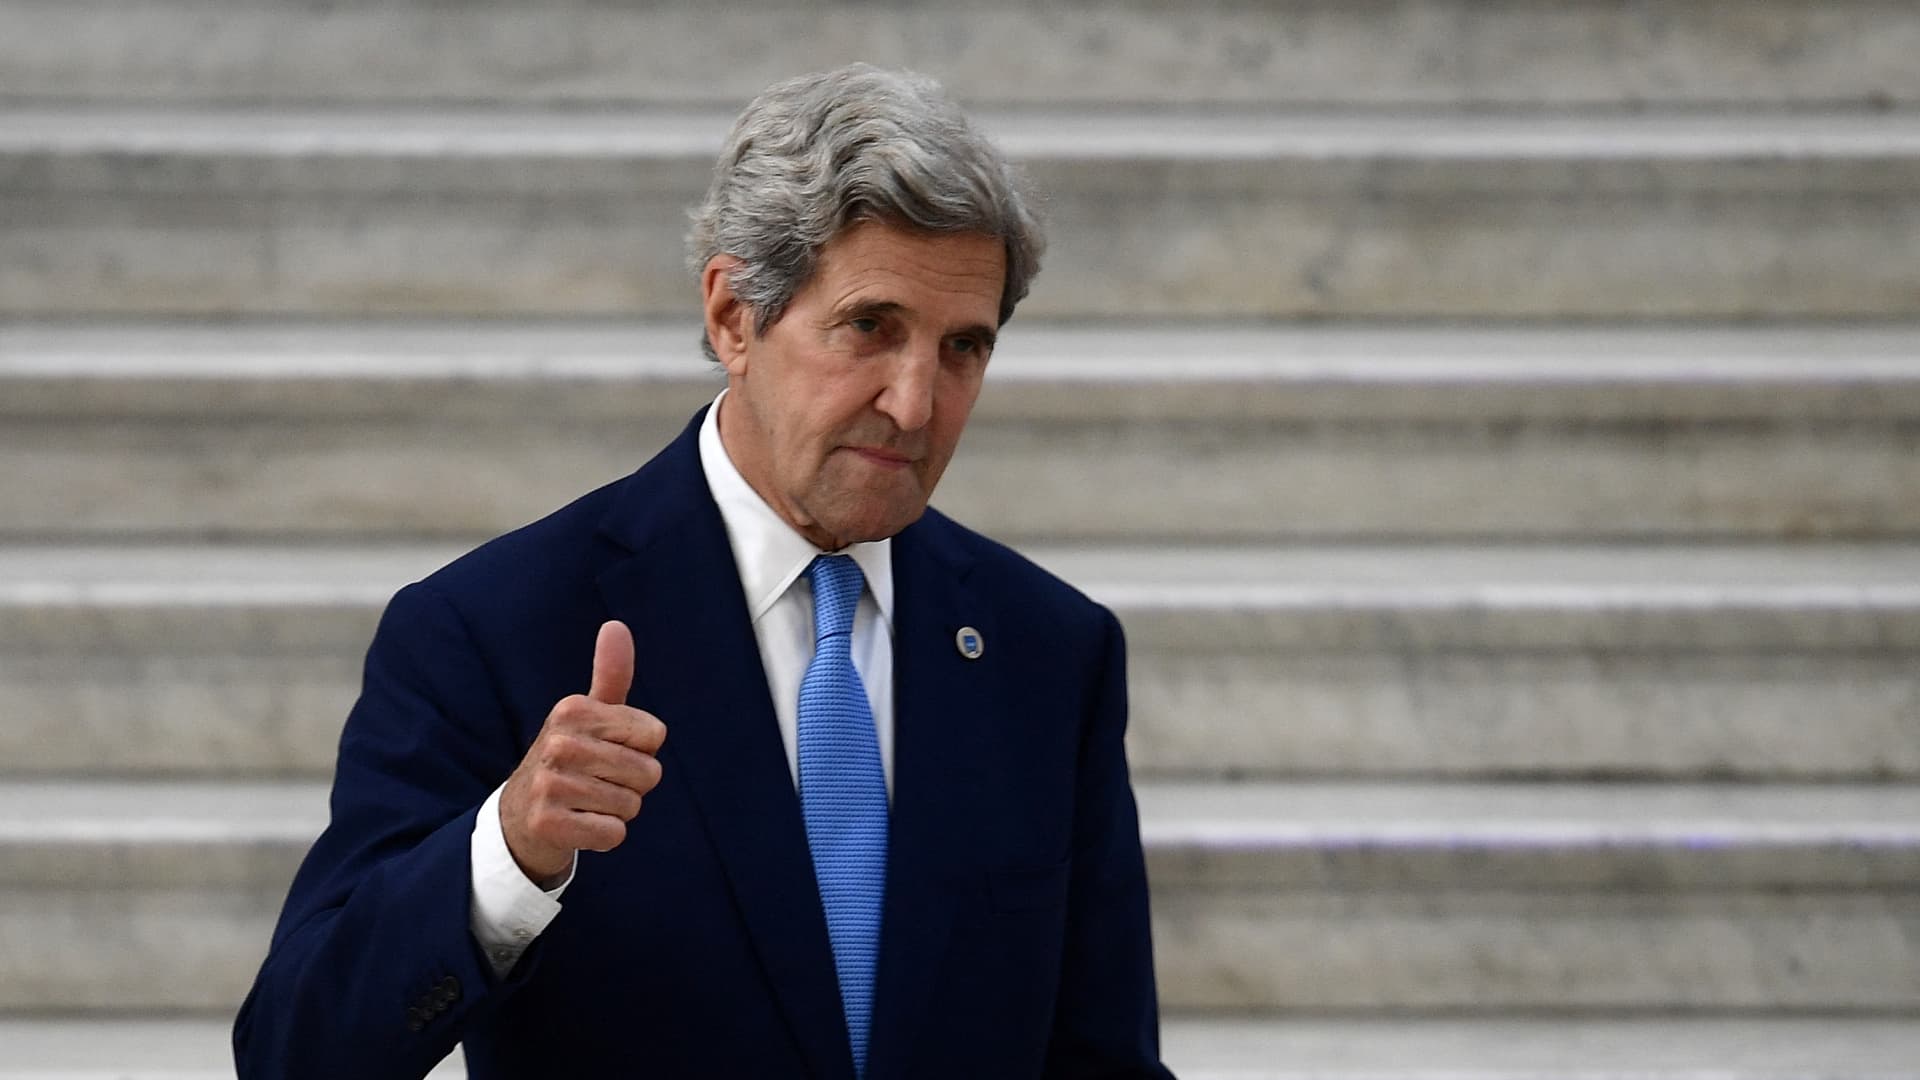 US Special Presidential Envoy for Climate John Kerry whilst meeting with Italy's Ecological Transition Minister Roberto Cingolani at Palazzo Reale for the climate and energy G20 meeting in the historical centre of Naples on July 23, 2021.